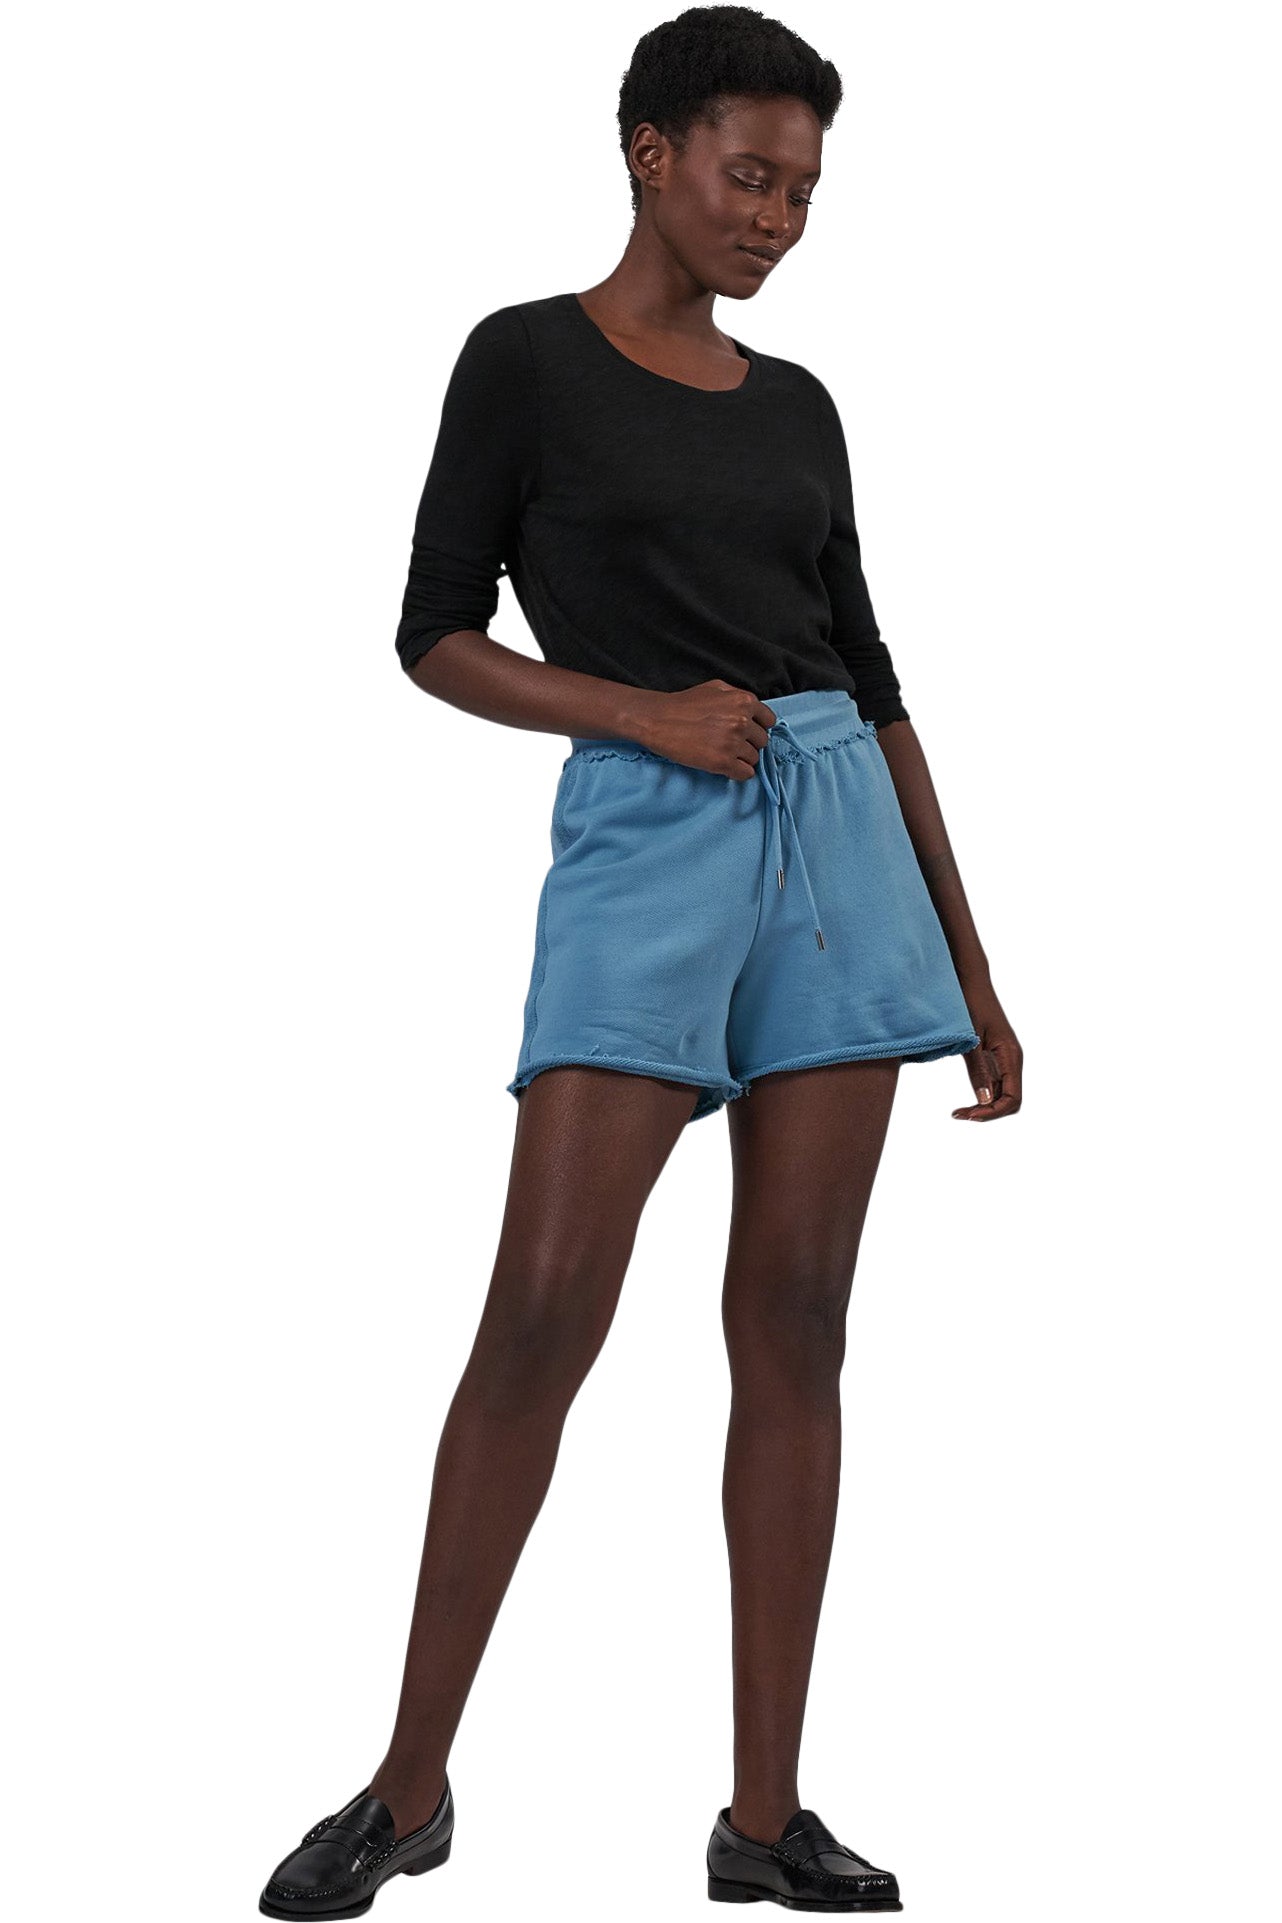 ATM French Terry Pull-on Shorts in Ocean